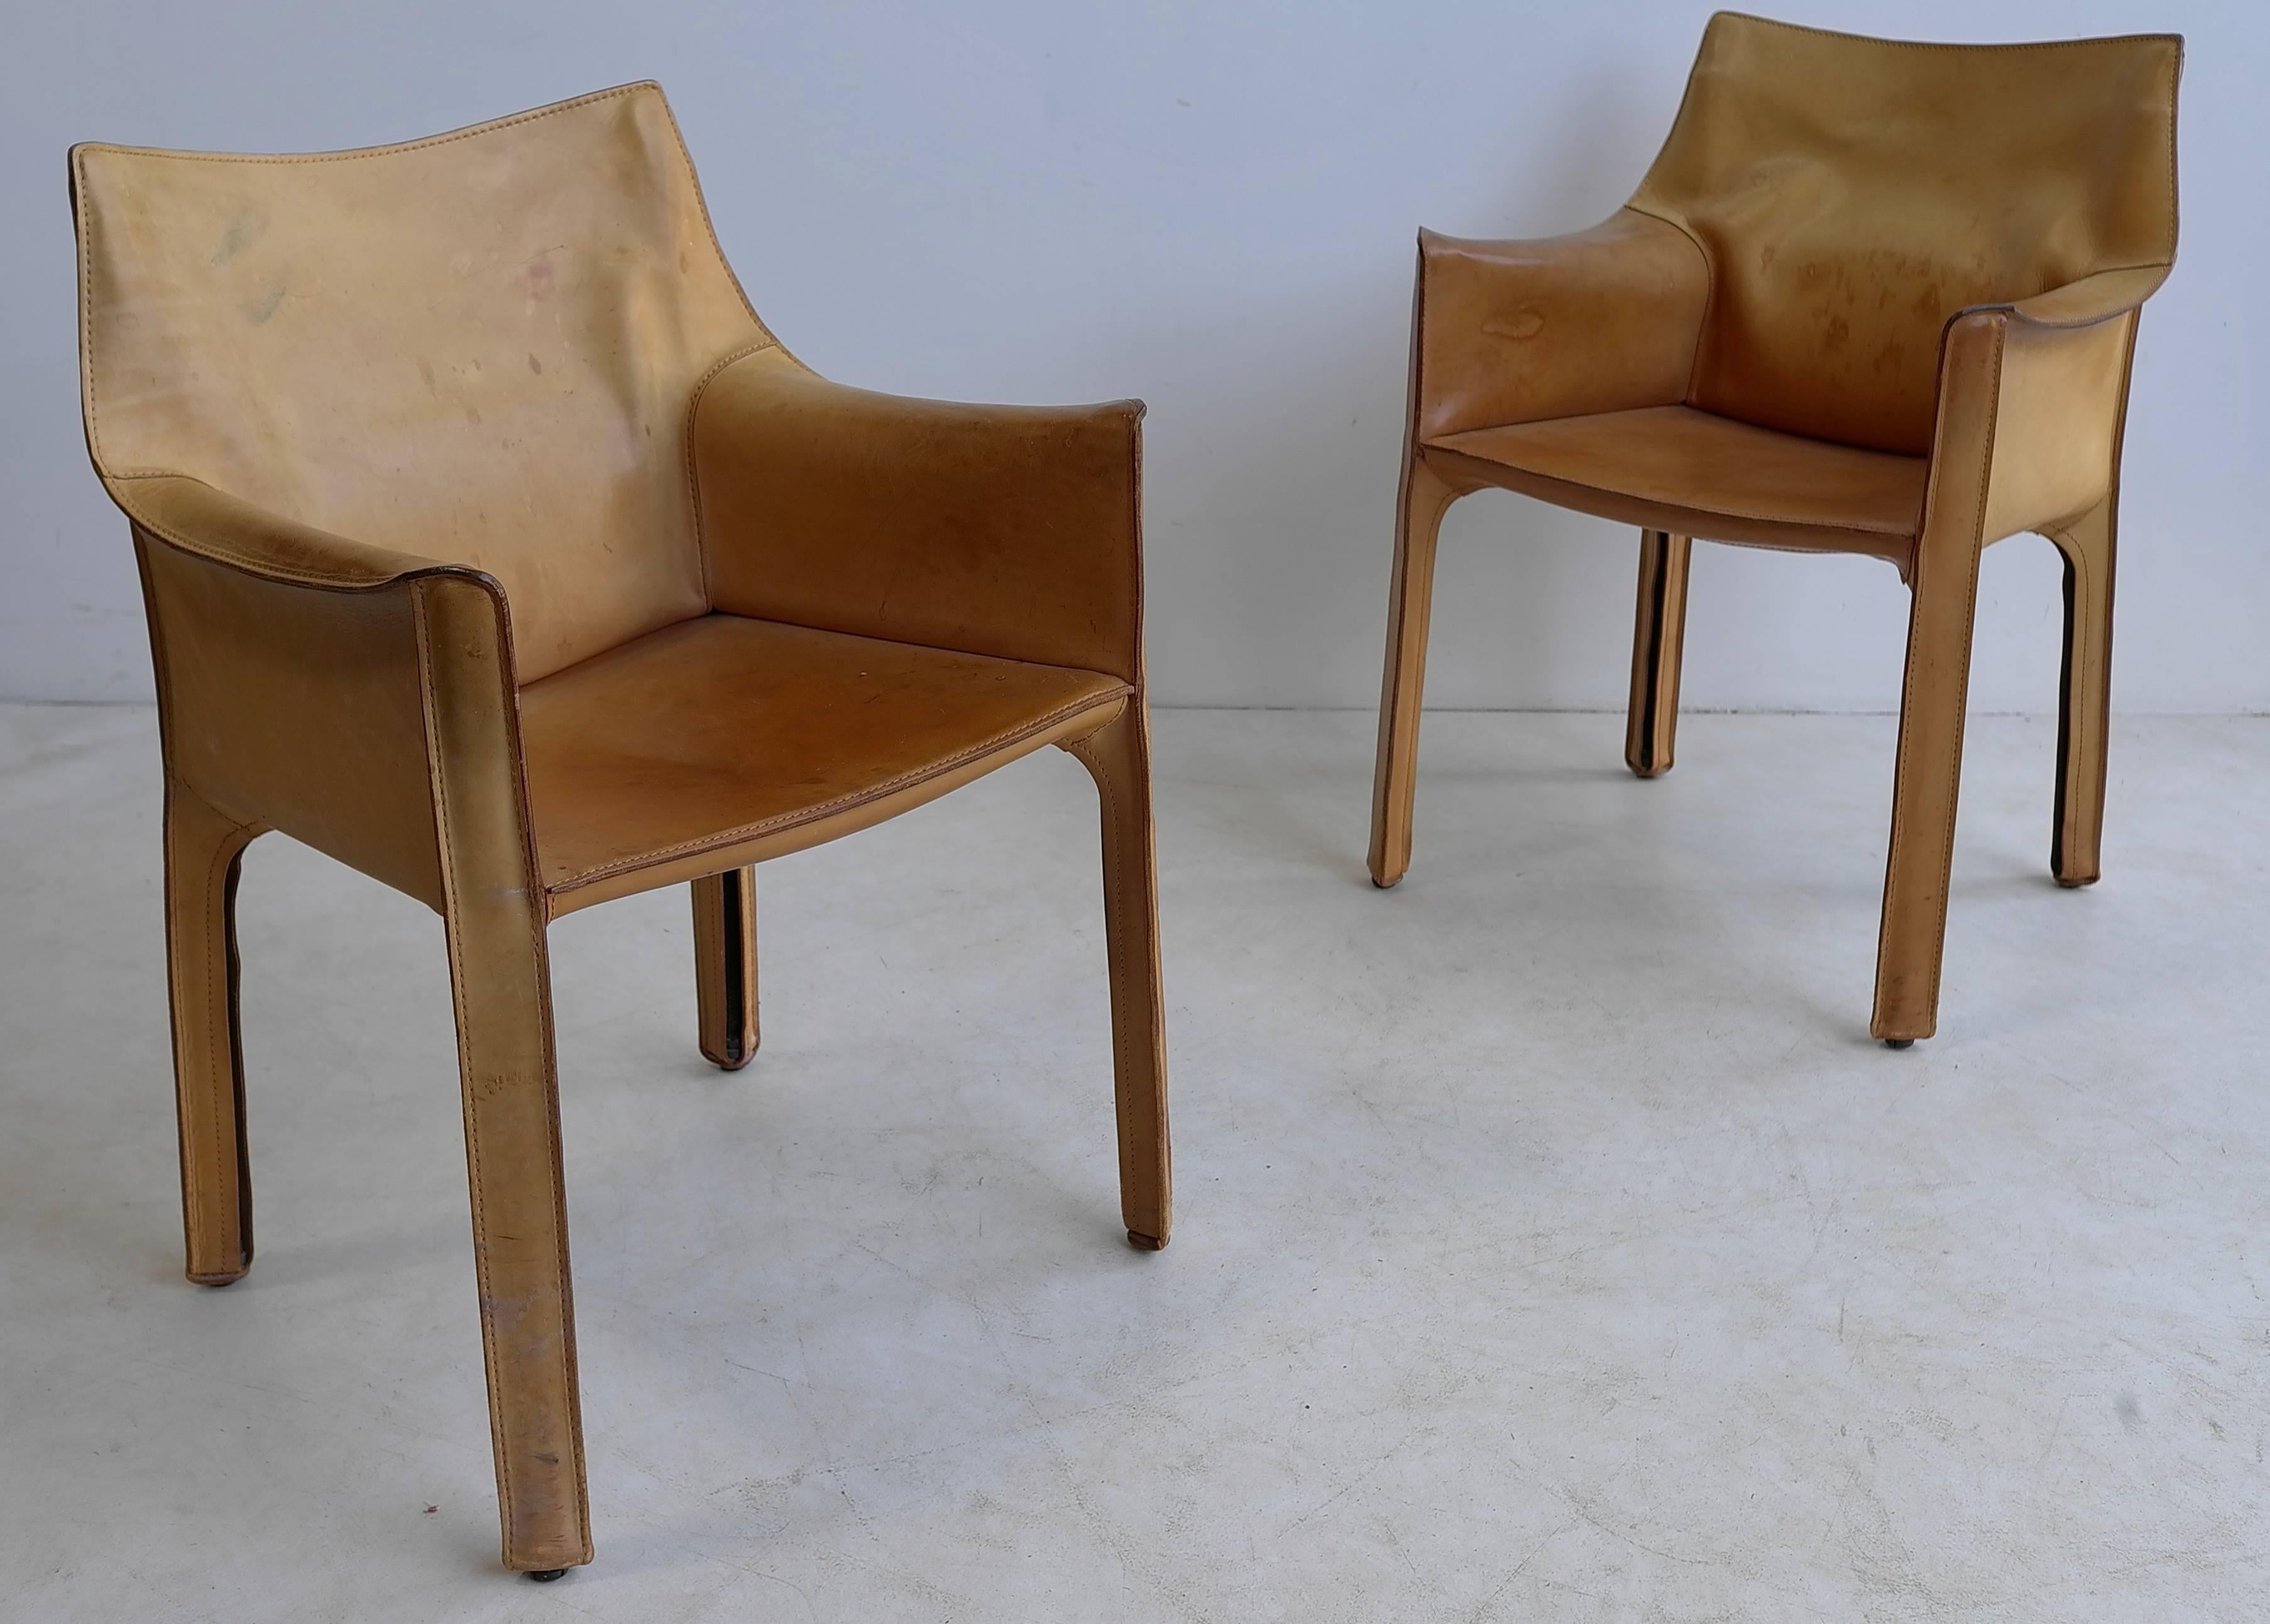 Pair of Mario Bellini cab chairs in natural leather by Cassina, Italy.

       